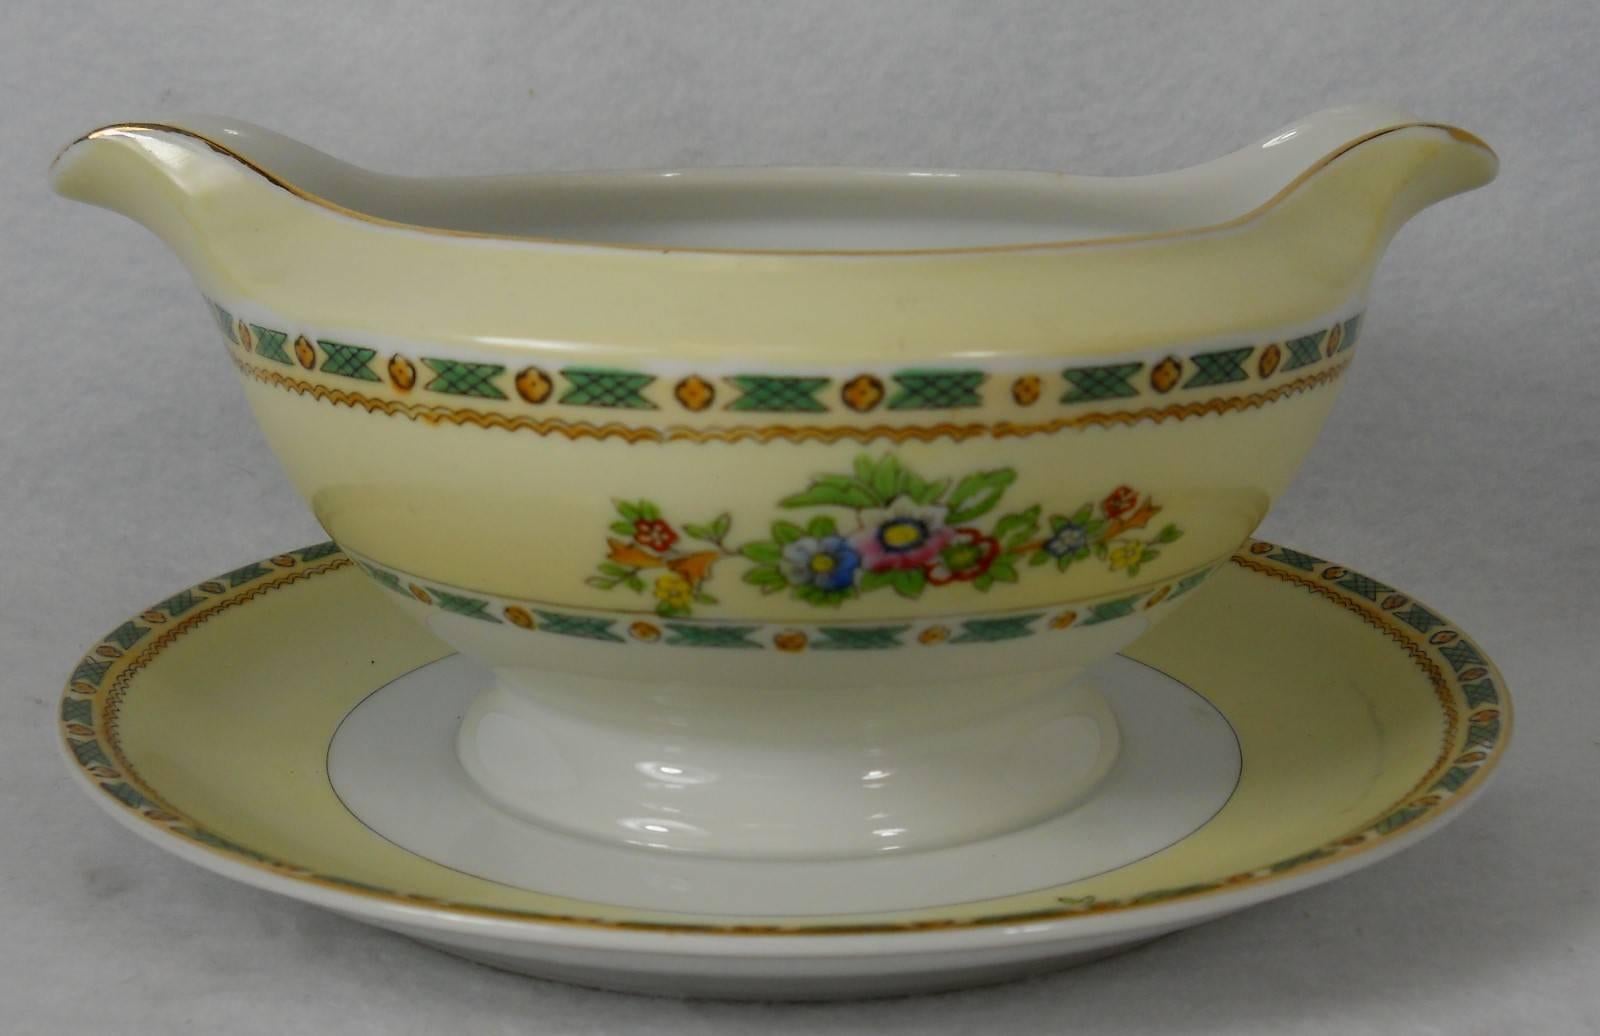 Noritake China N1327 pattern 8-piece hostess serving set.

In great condition free from chips, cracks, breaks, stains, or discoloration and with only a minimum of use.

Includes creamer, sugar bowl with lid, oval vegetable serving bowl, round